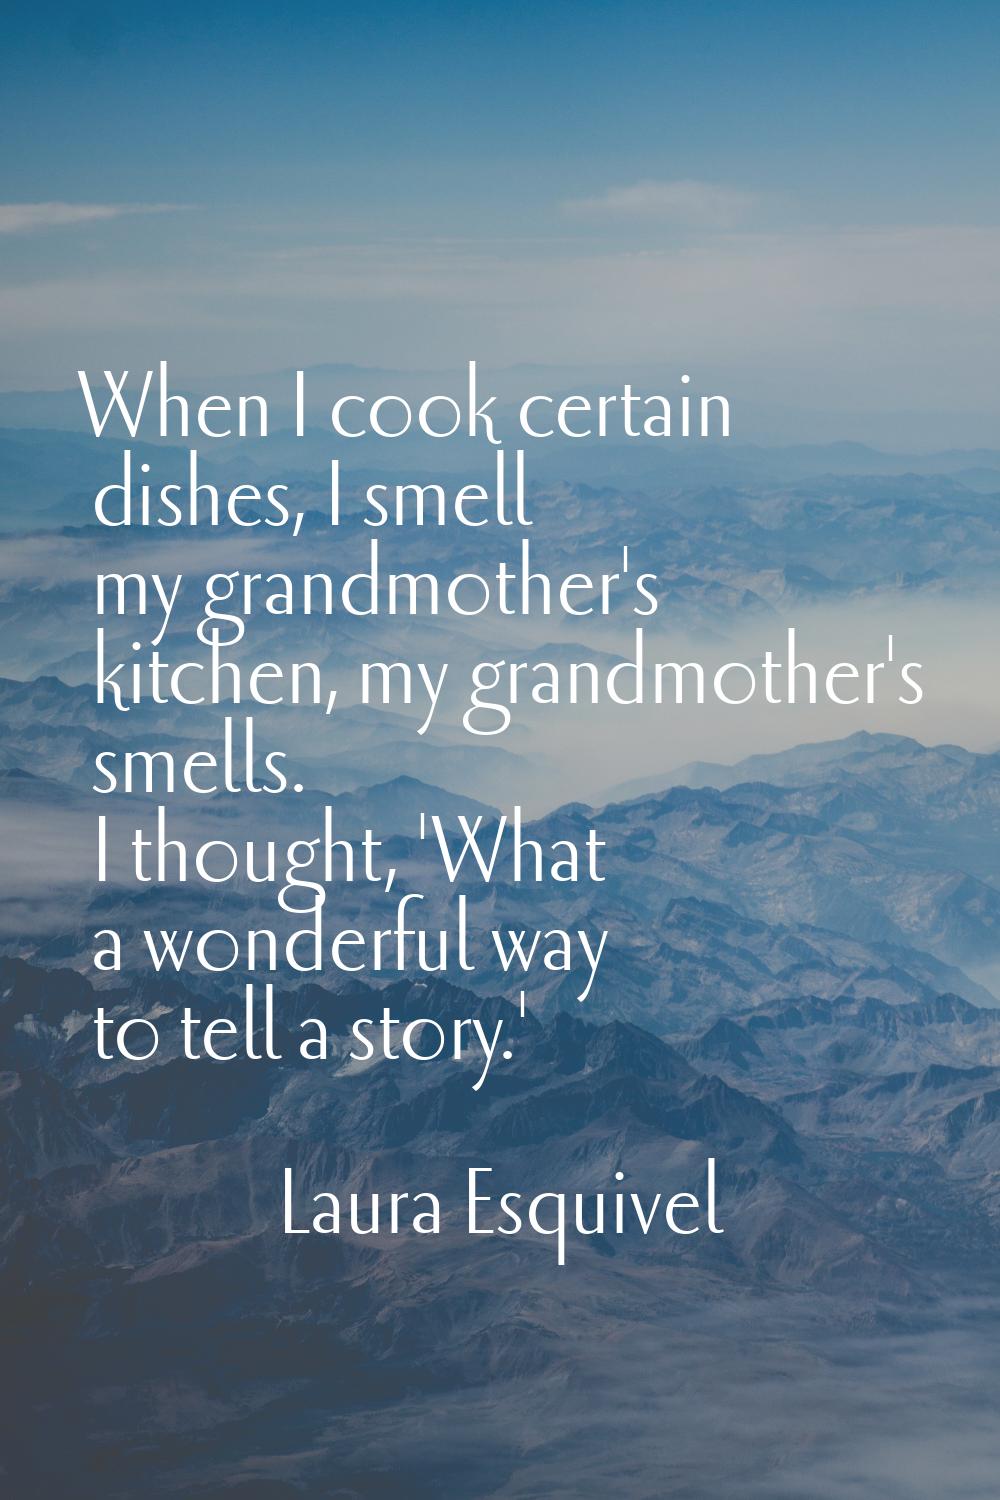 When I cook certain dishes, I smell my grandmother's kitchen, my grandmother's smells. I thought, '